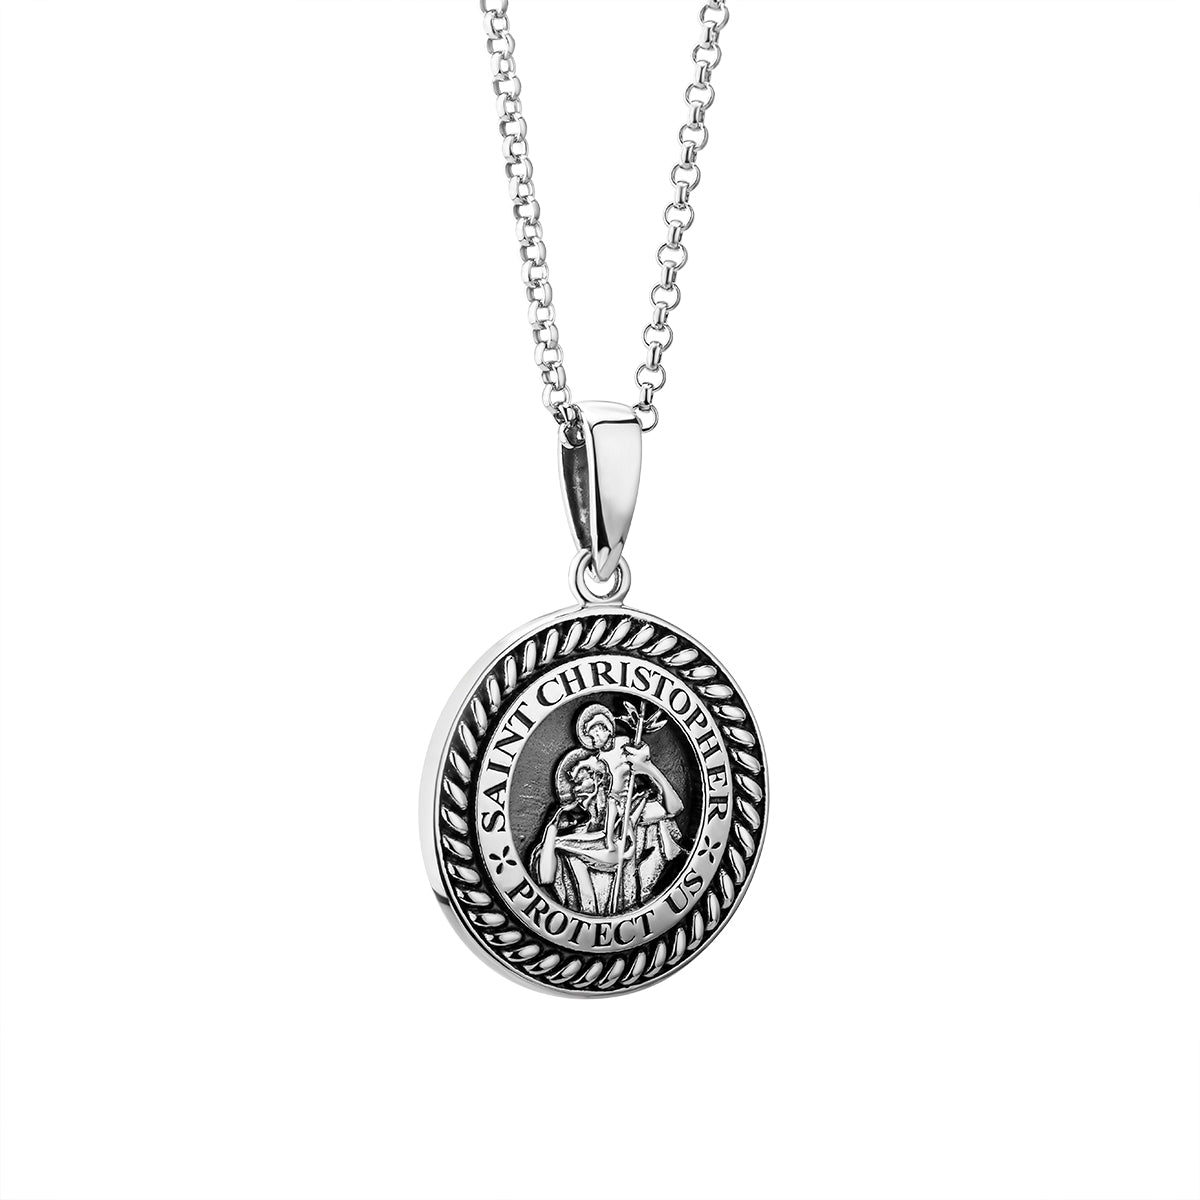 Oxidised sterling silver gents St Christopher round medal pendant S46843 from Solvar